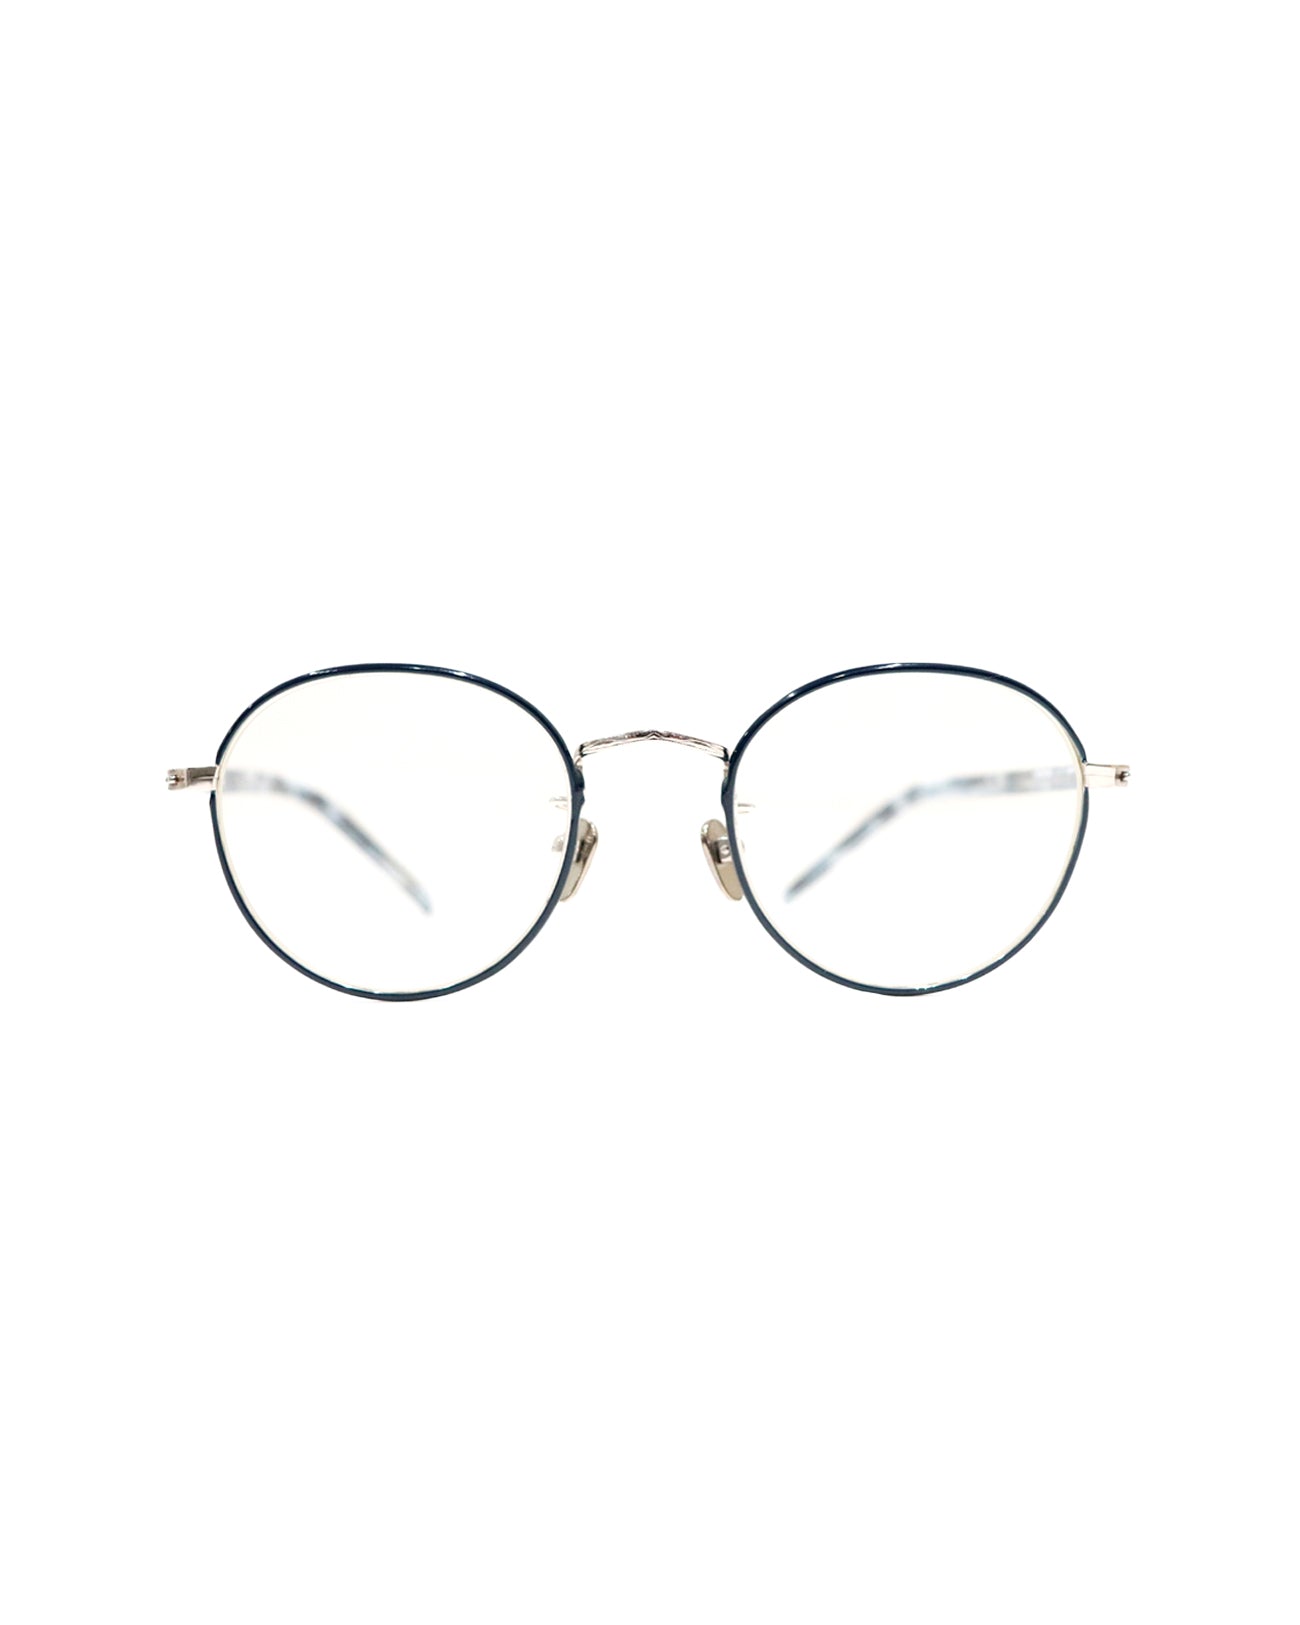 softframe / navy / clear lens - FAB4 ONLINE STORE